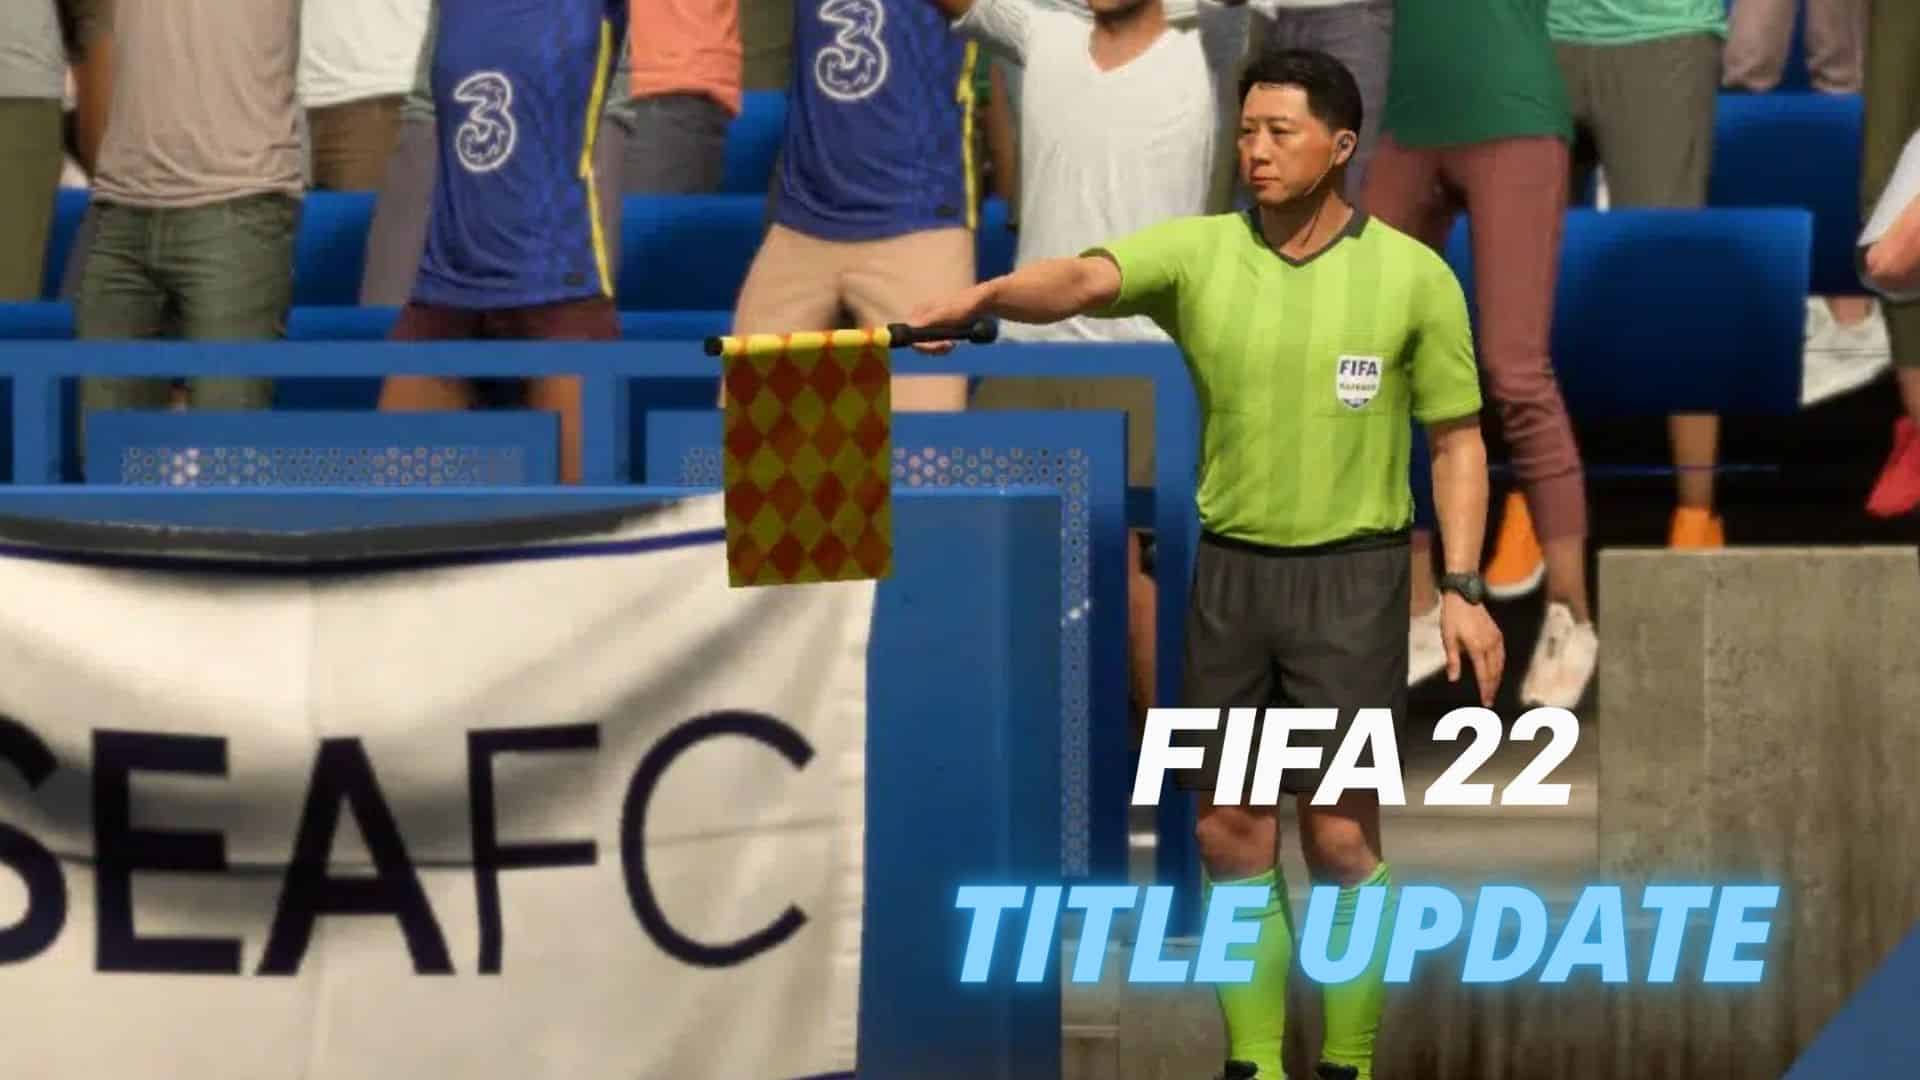 FIFA 22 News, Page 1 of 3